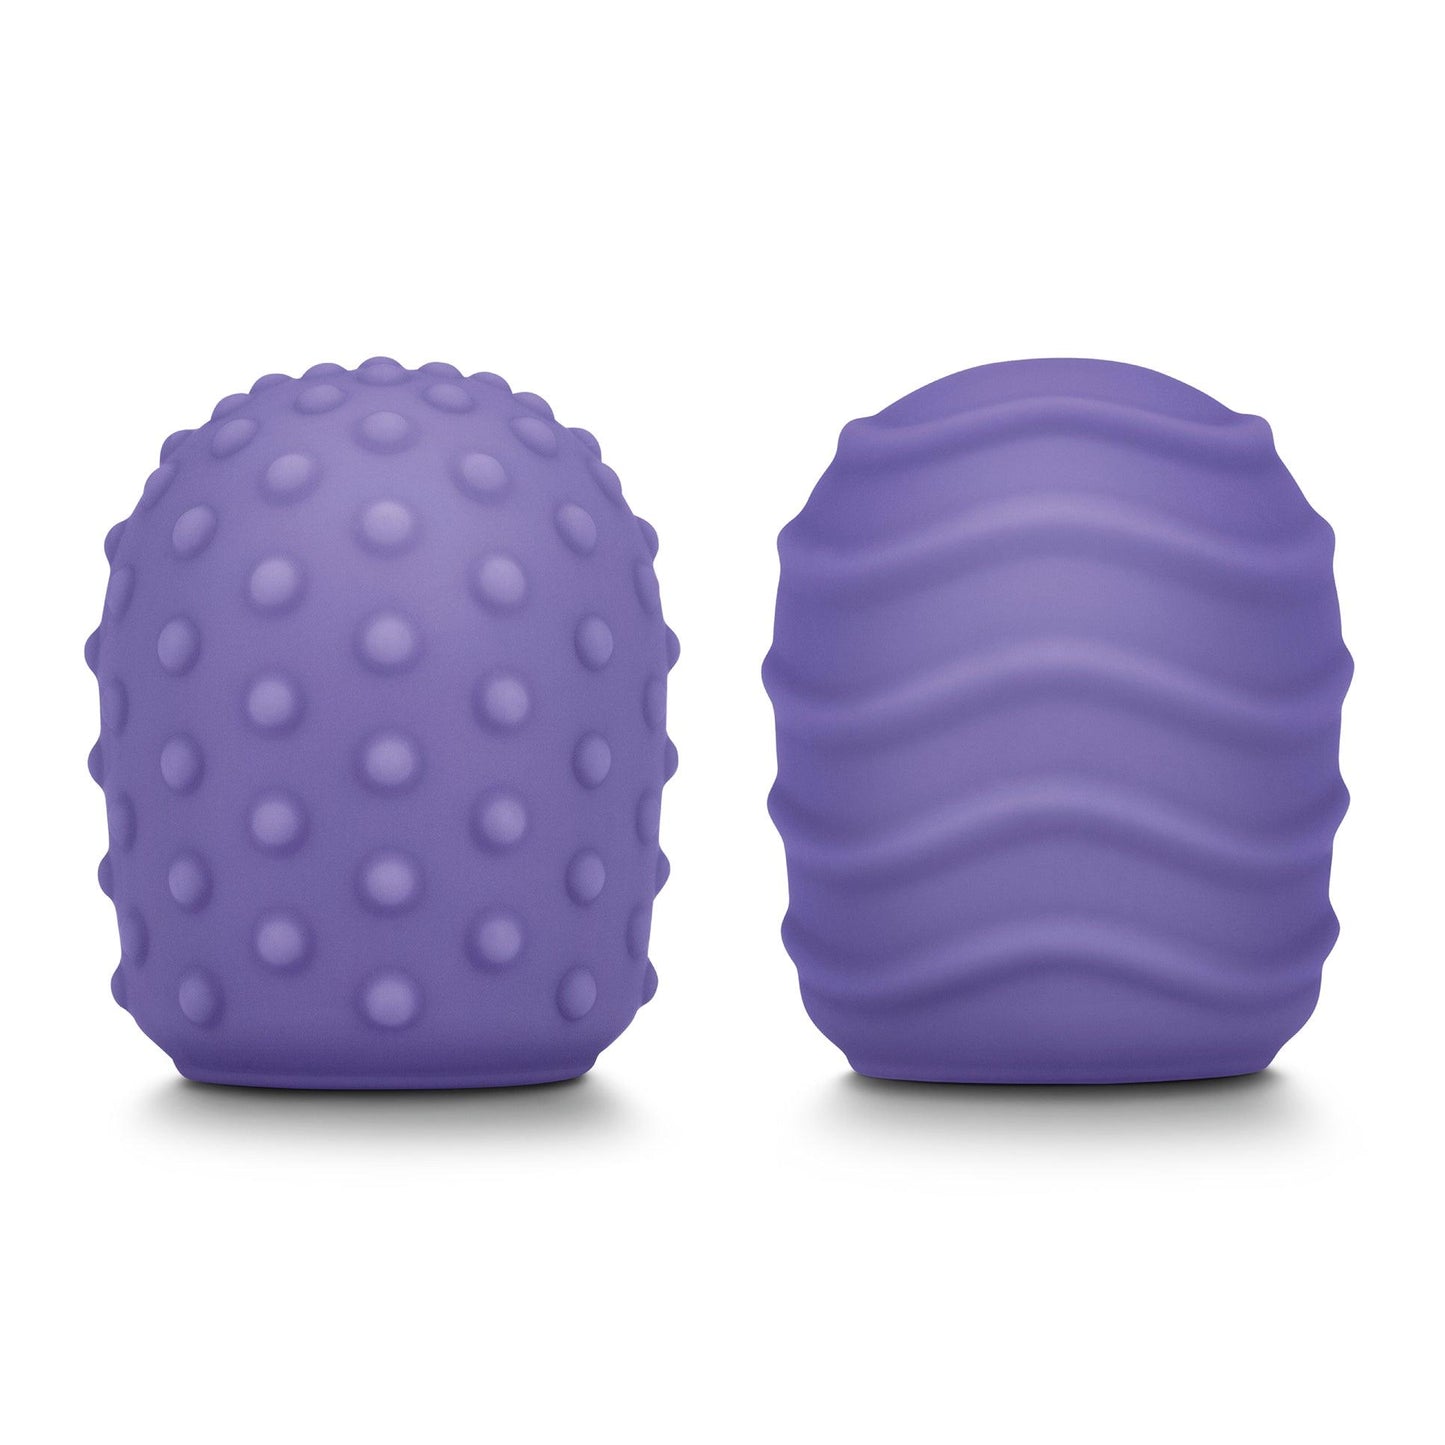 Le Wand - Le Wand Silicone Texture Covers (2-Pack) - Yonifyer